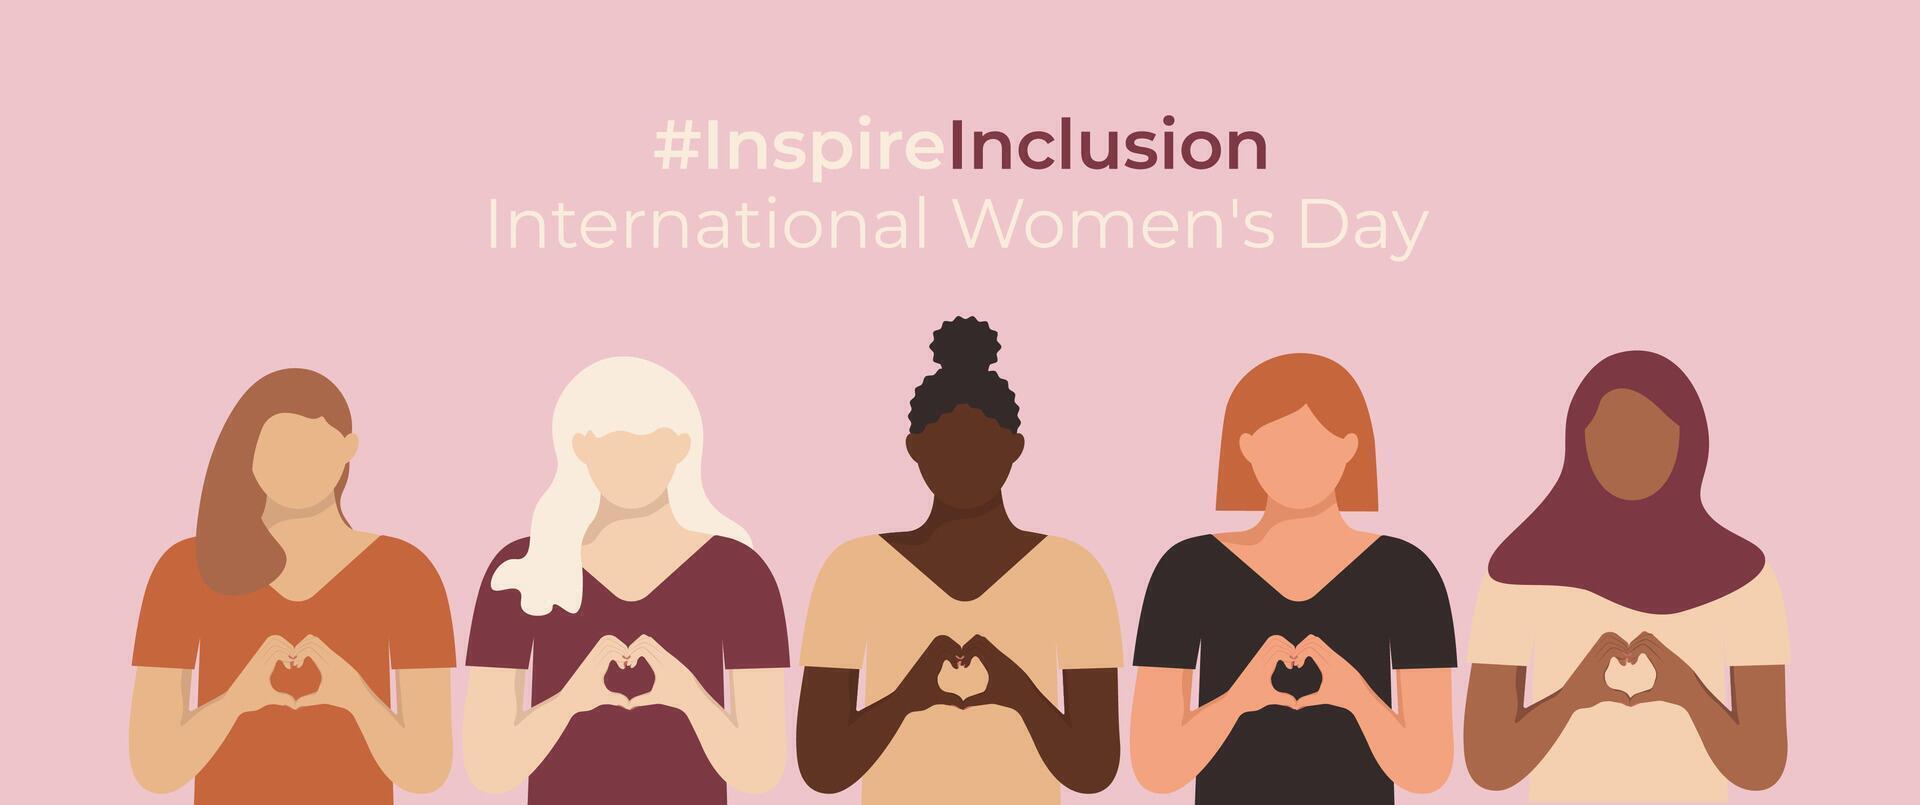 InspireInclusion International Women's Day banner. Minimalist illustration with Inspire Inclusion slogan. Diverse women with heart-shaped hands stand together in faceless style. vector